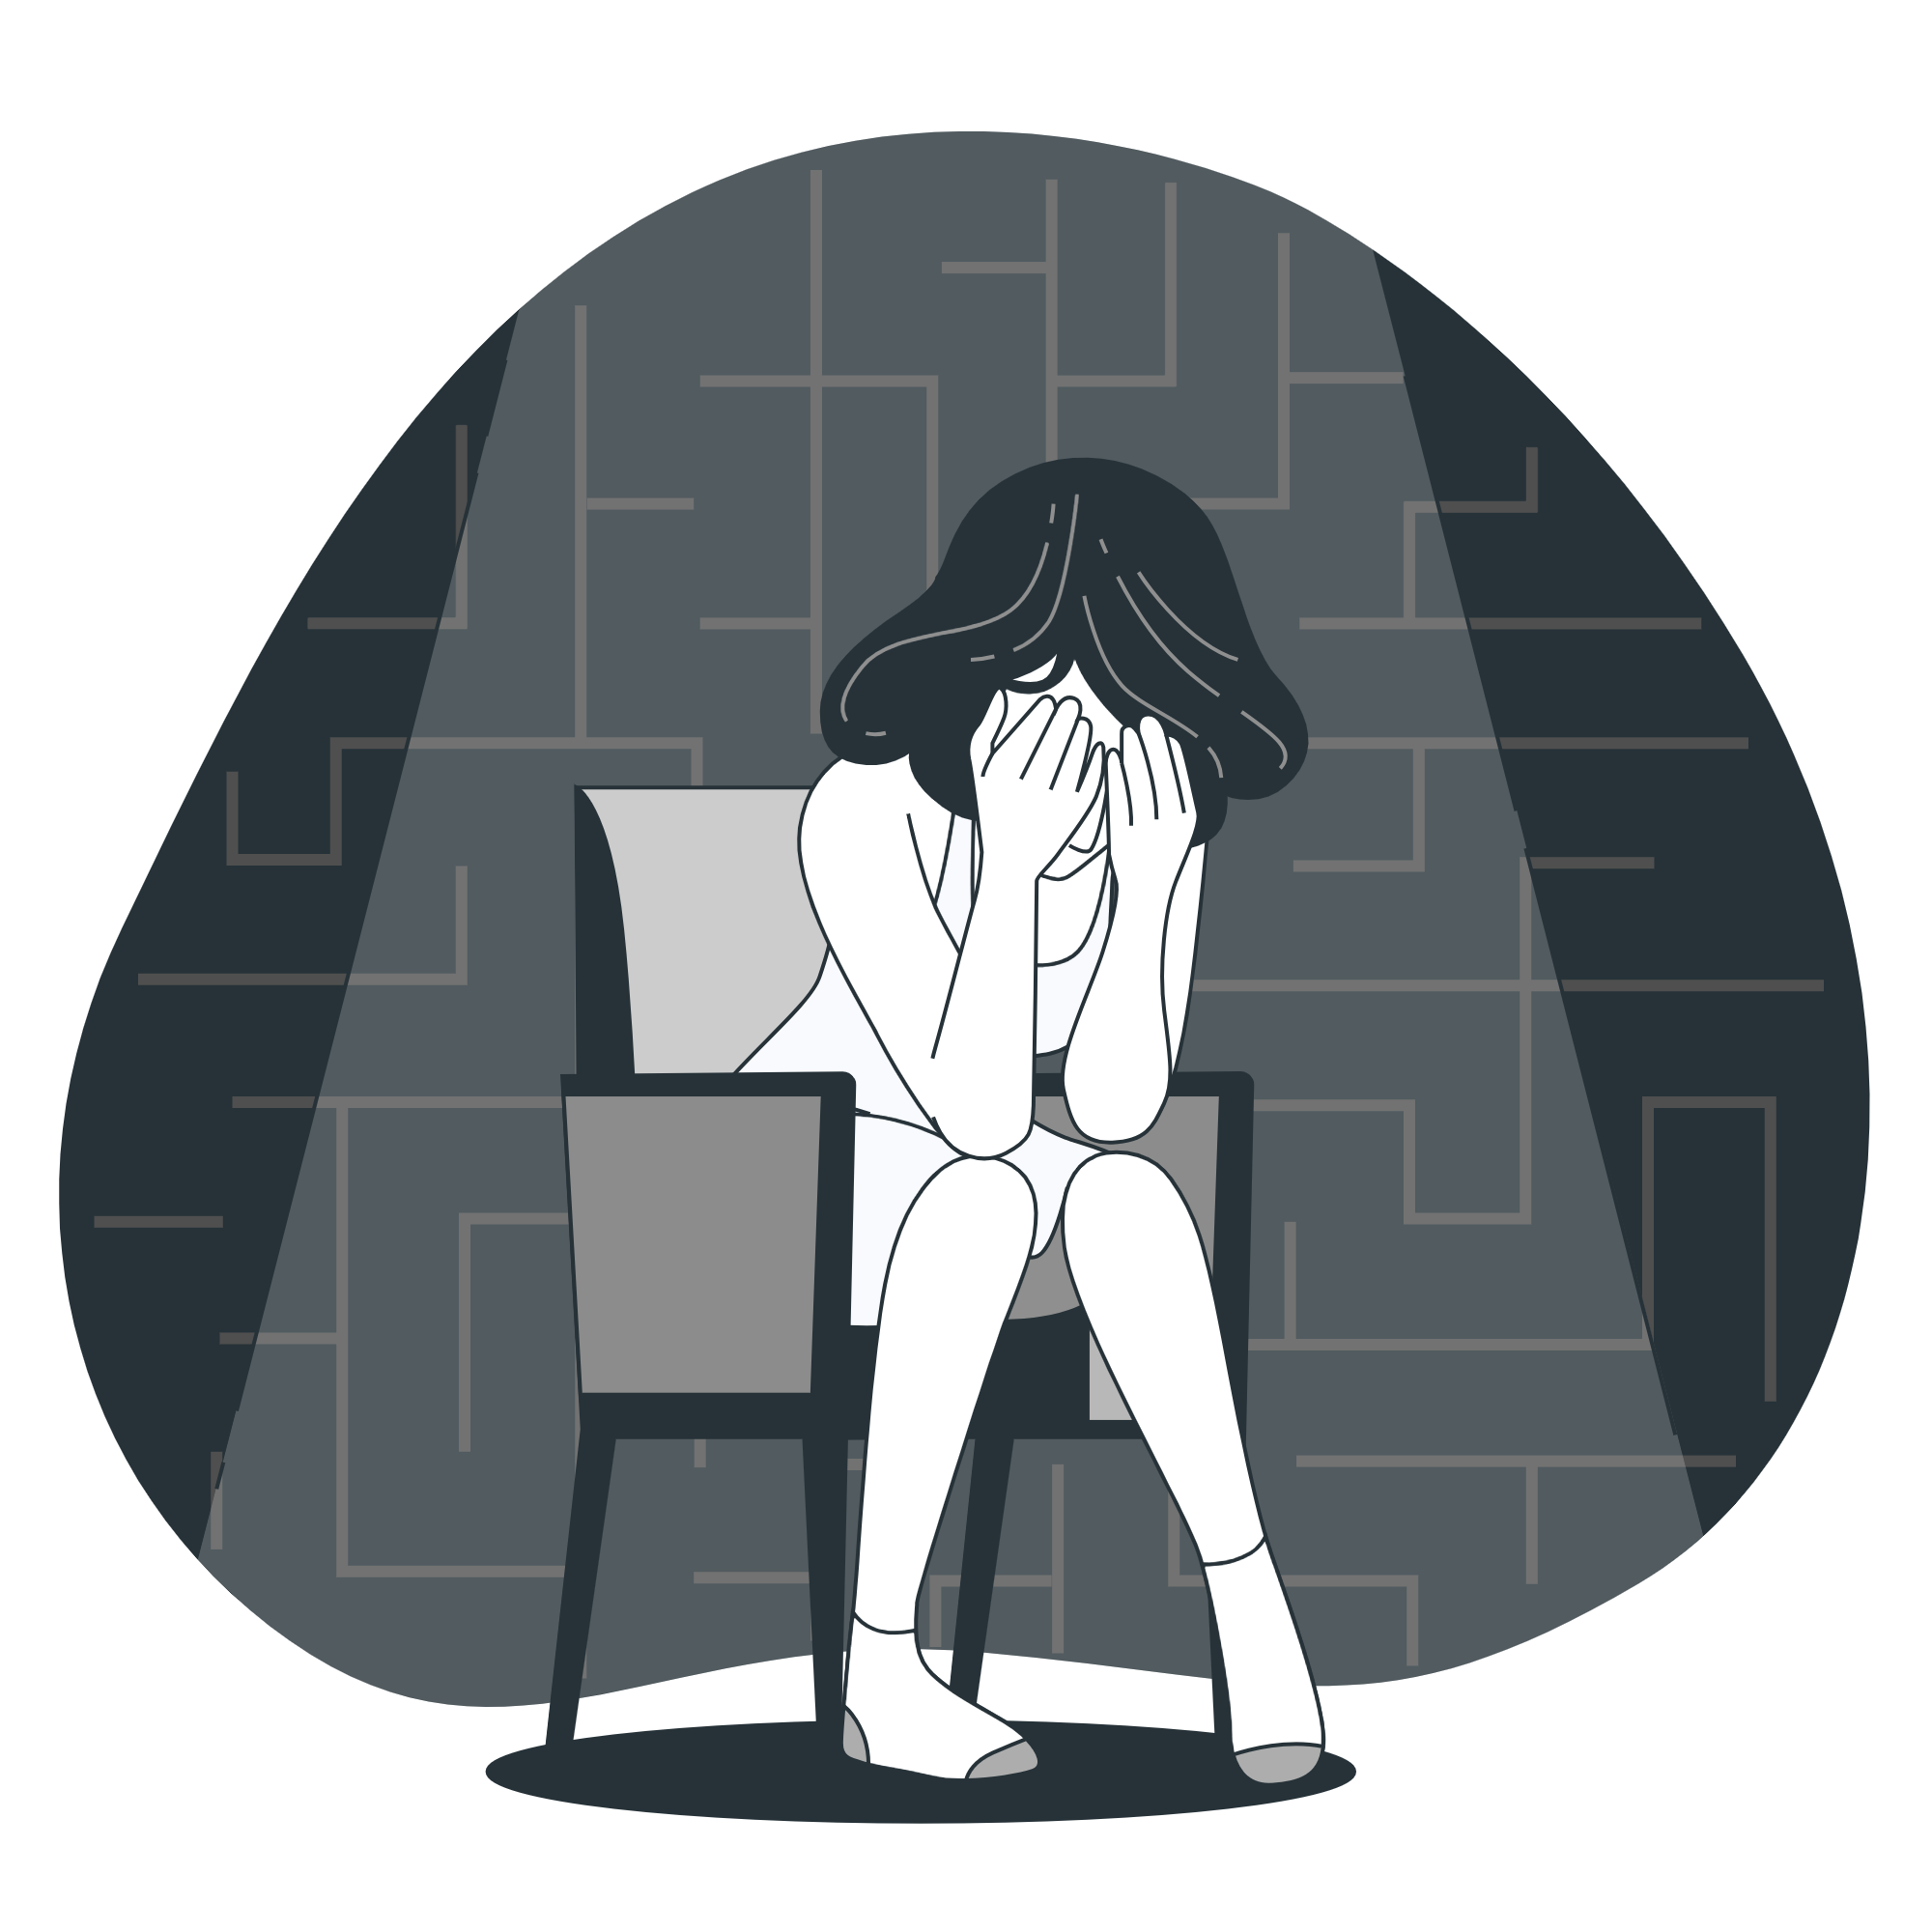 Image representing mental illness awareness: A person feeling helpless and alone, emphasizing empathy and mental health care